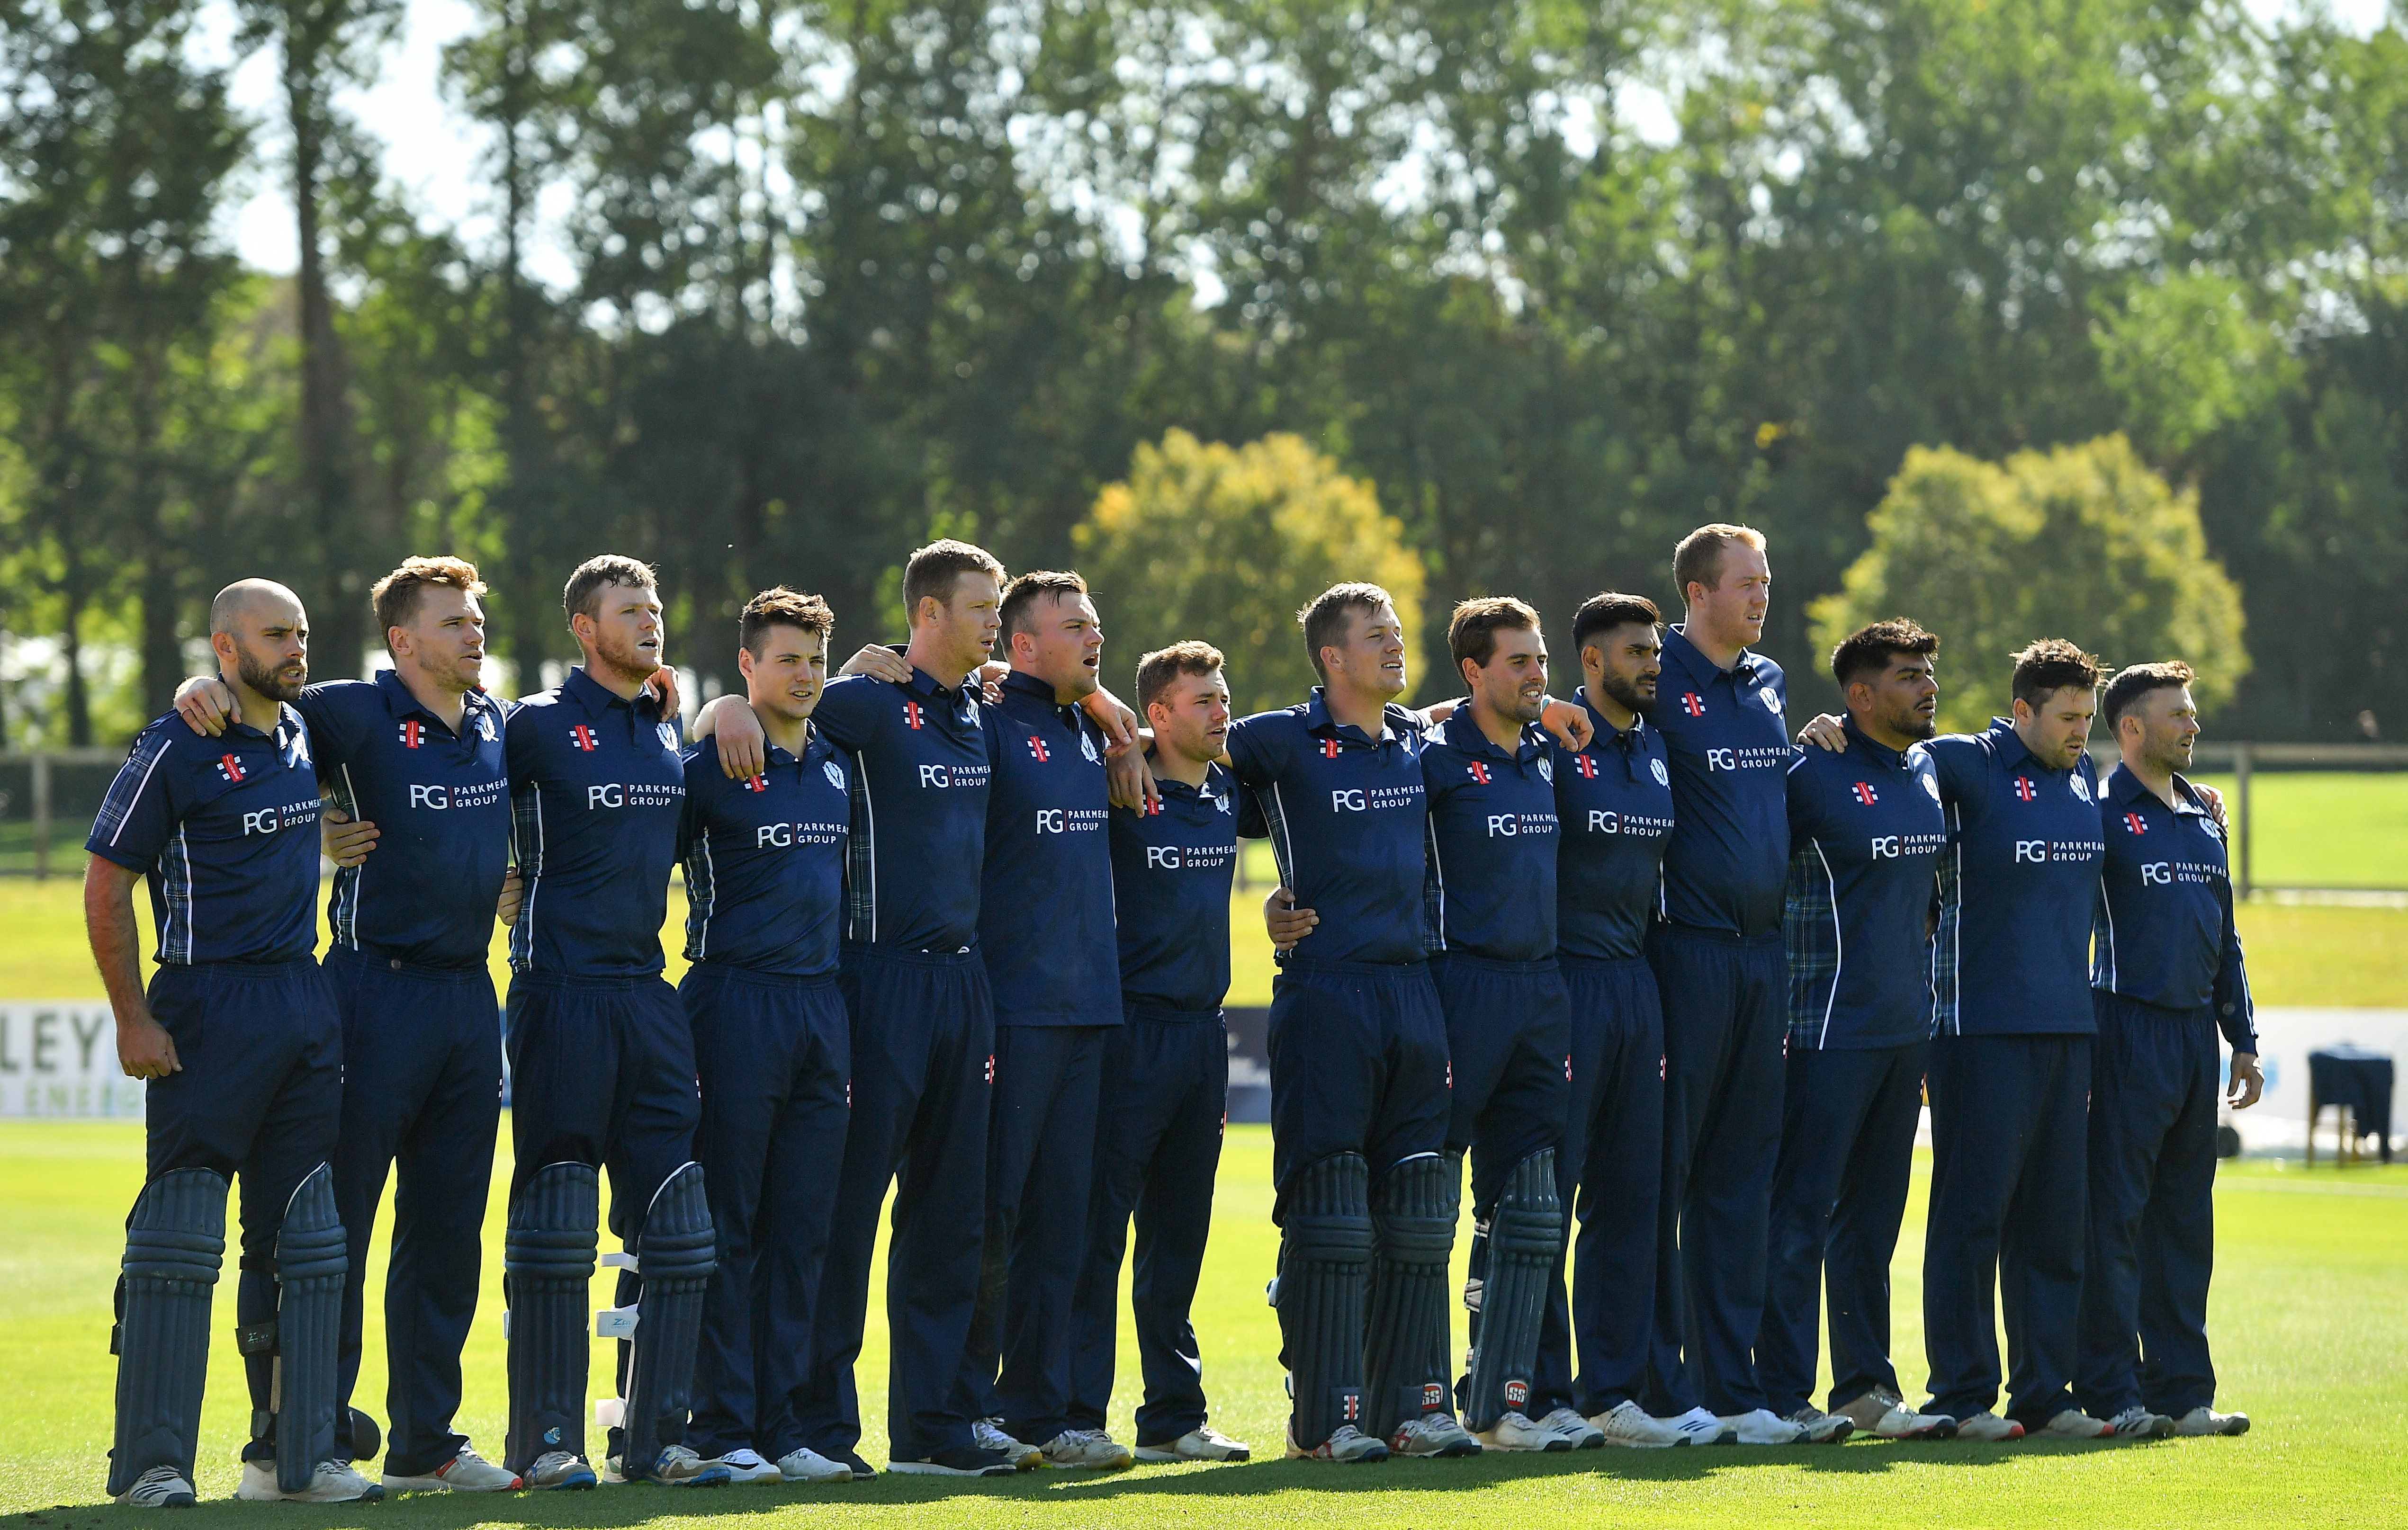 Scotland to host BLACKCAPS for men’s One Day International